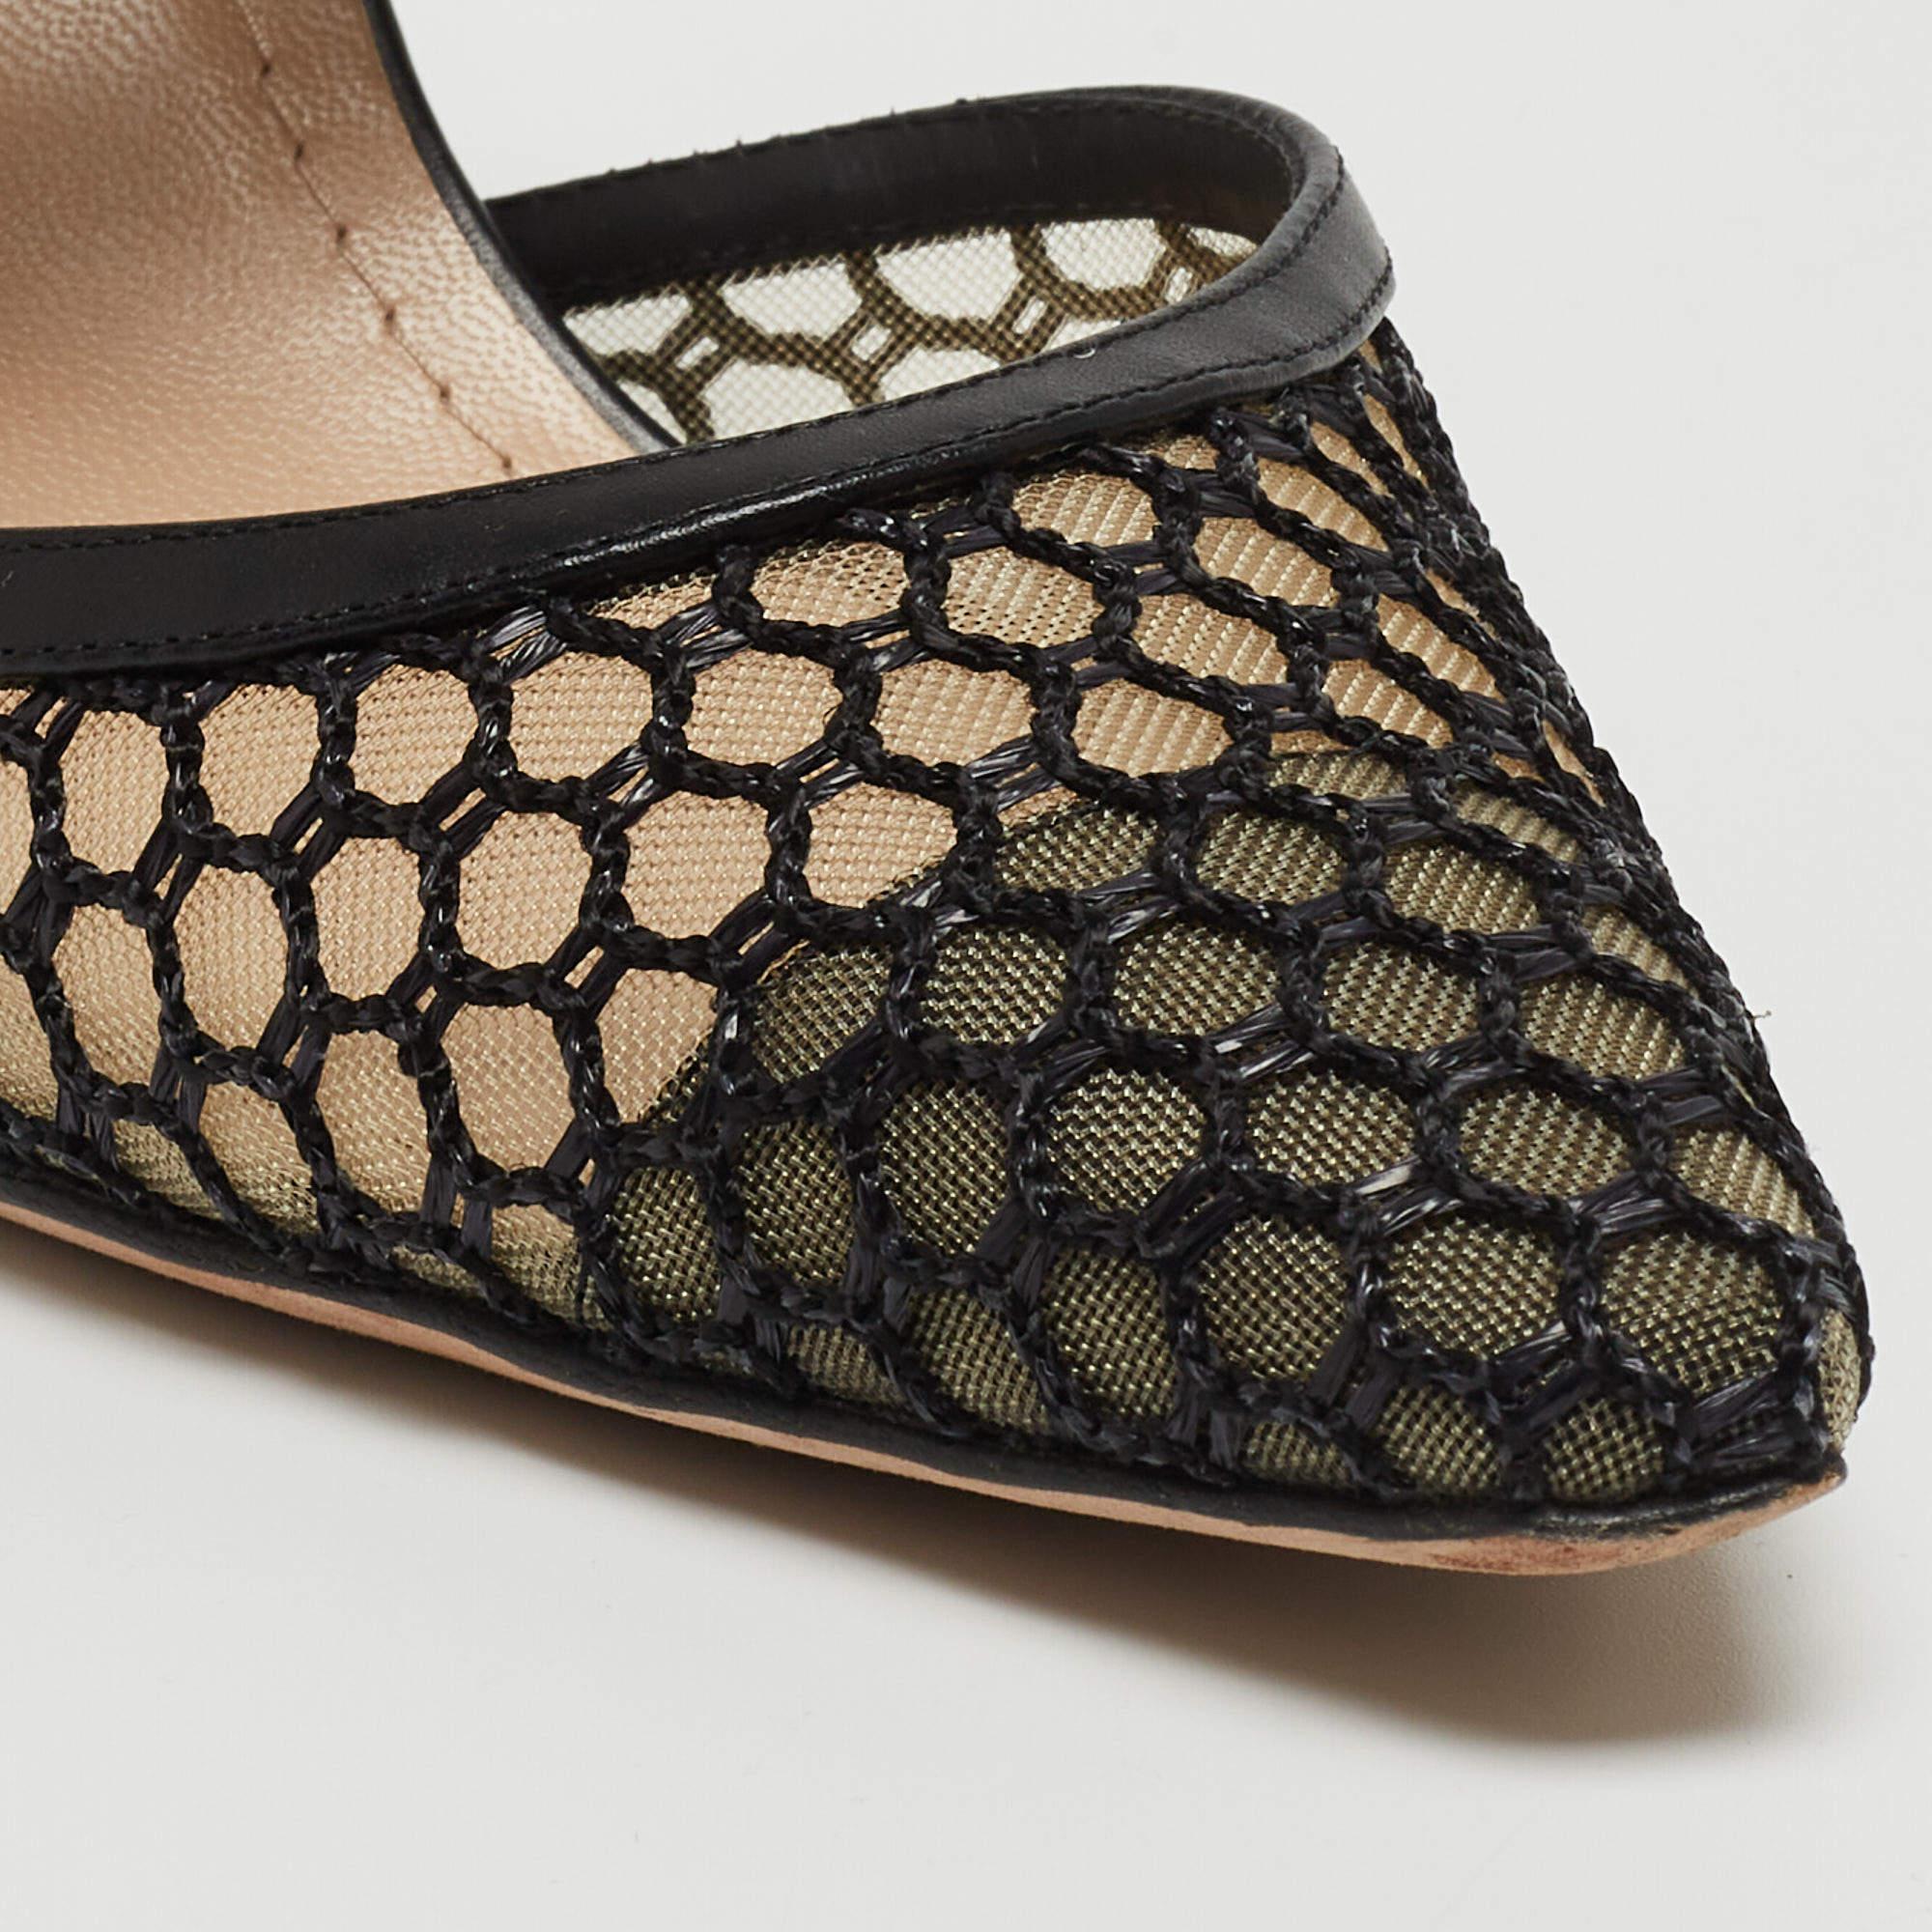 Dior Black Mesh and Leather Fishnet D-Dior Mules Size 36.5 3